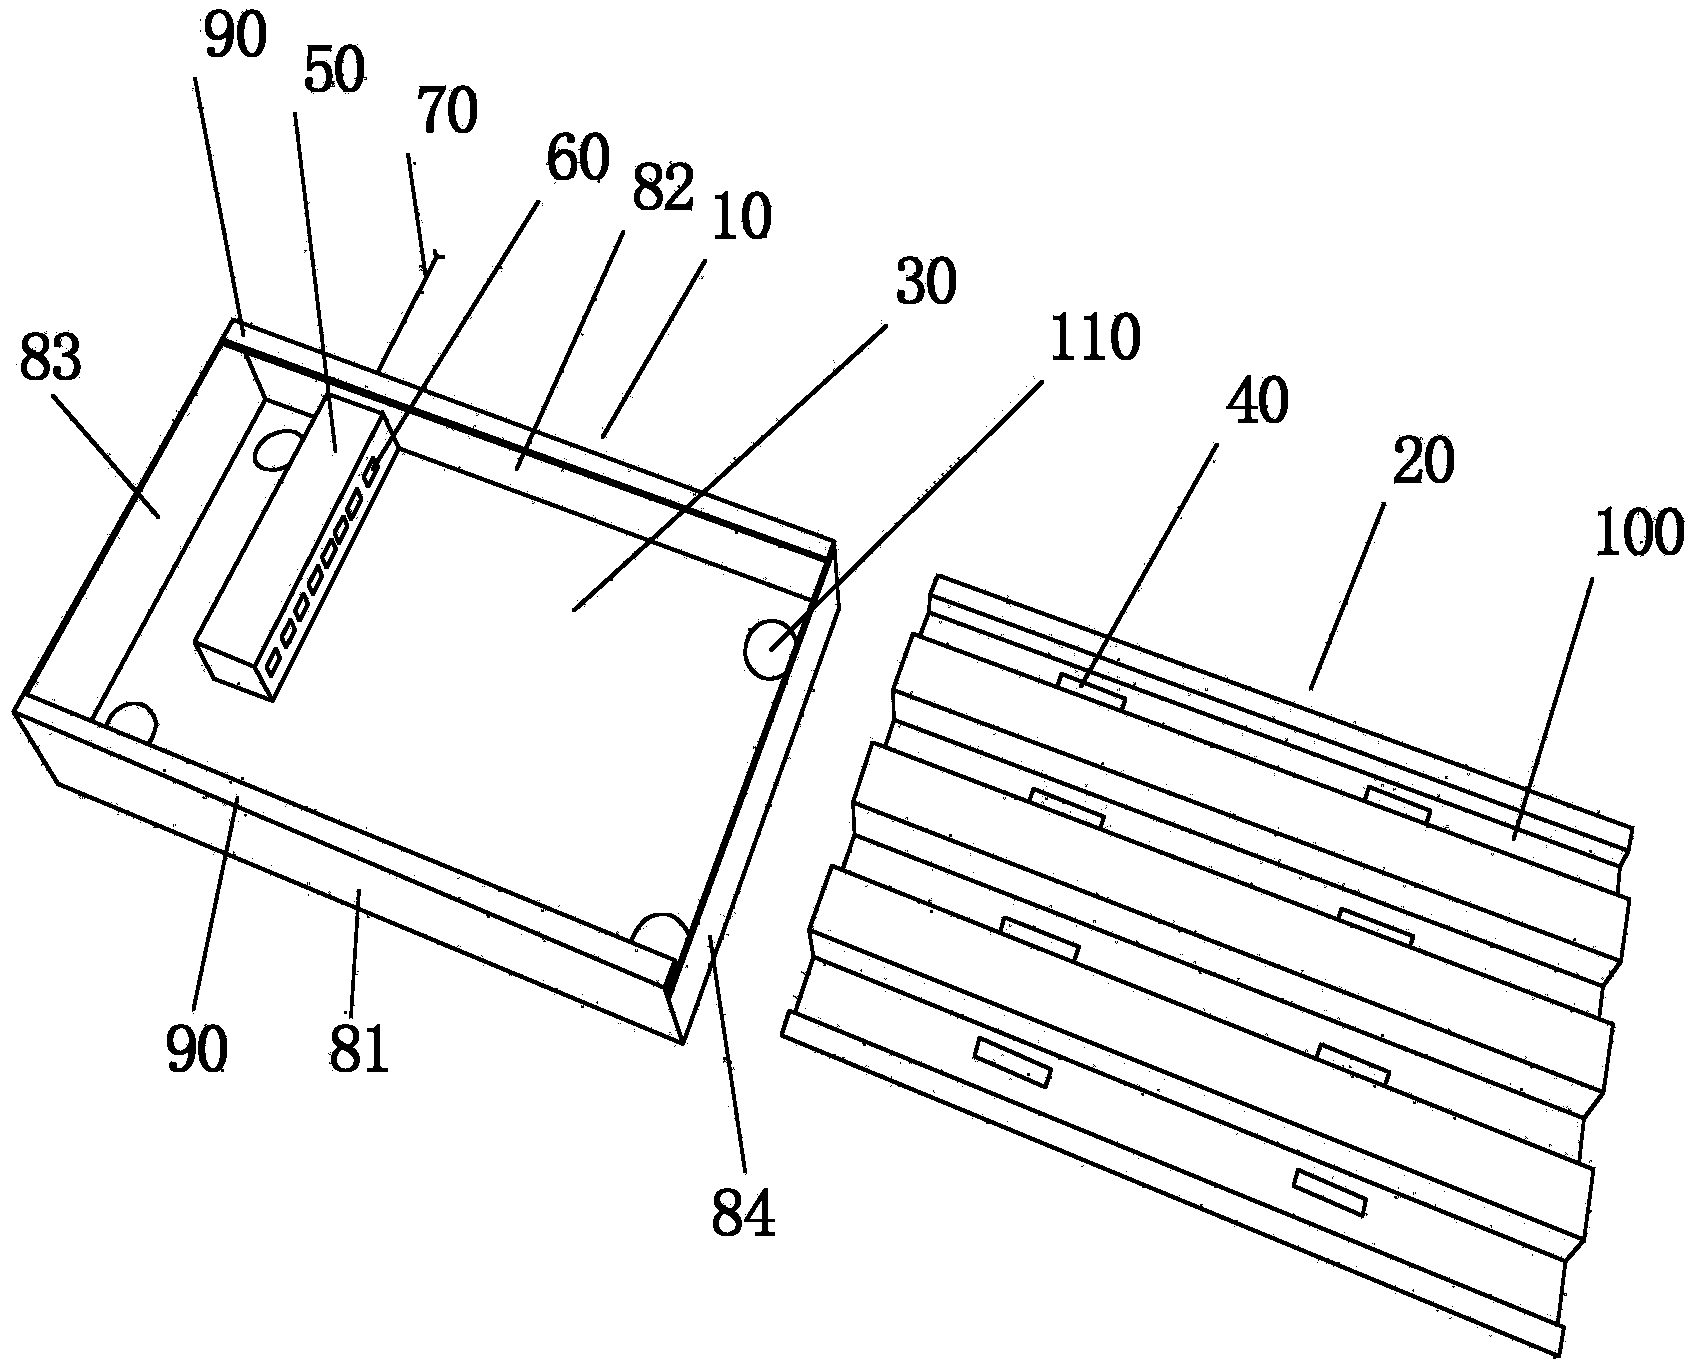 Integrated charging base for intelligent devices